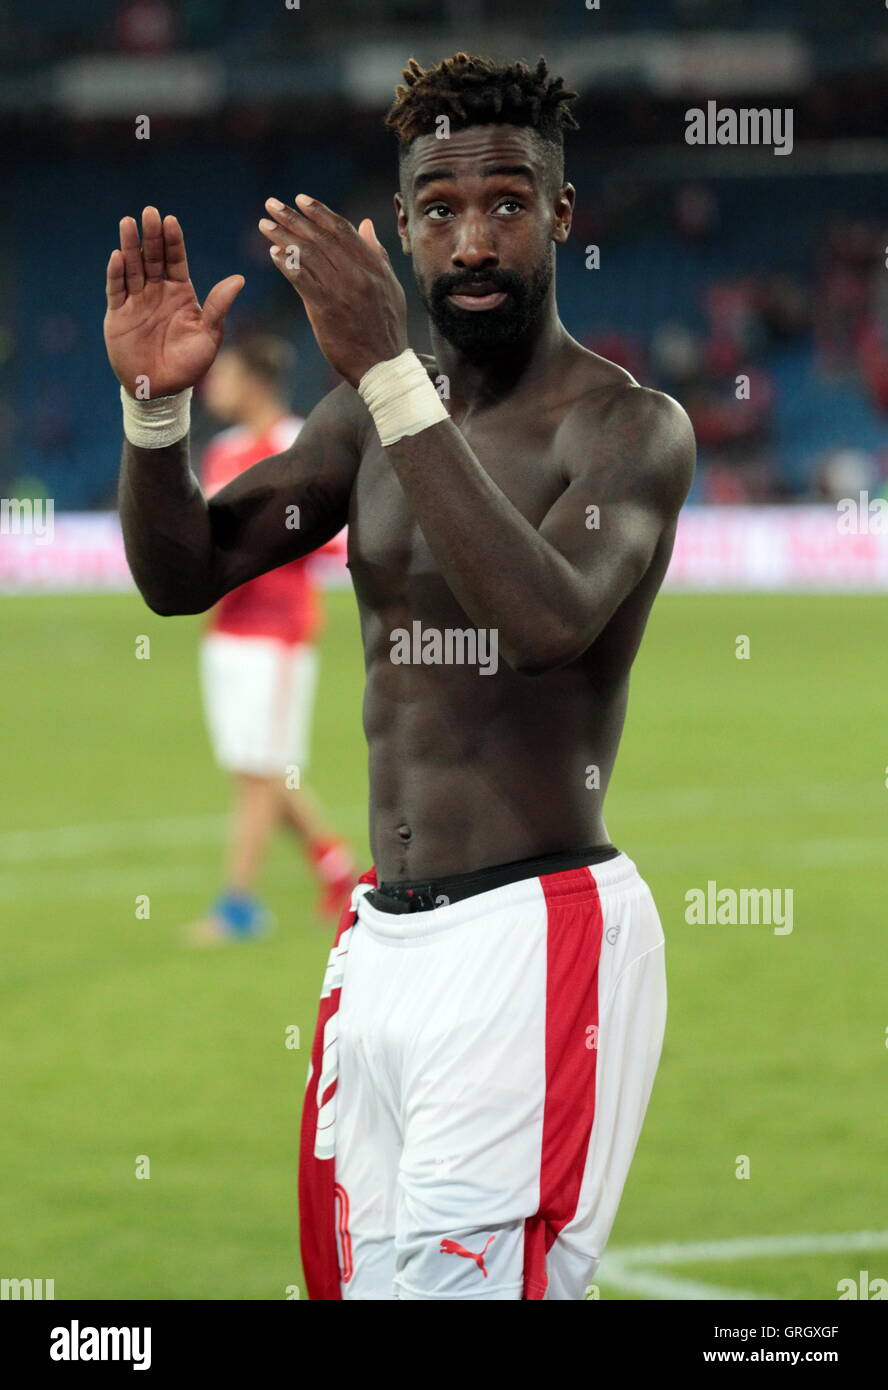 Basel, Switzerland. 6 September 2016 Johan Djourou in action during the qualifying match of the World Cup Group B Switzerland against Portugal at St Jakob Park in Basel, Switzerland Credit:  Laurent Lairys/Agence Locevaphotos/Alamy Live News Stock Photo